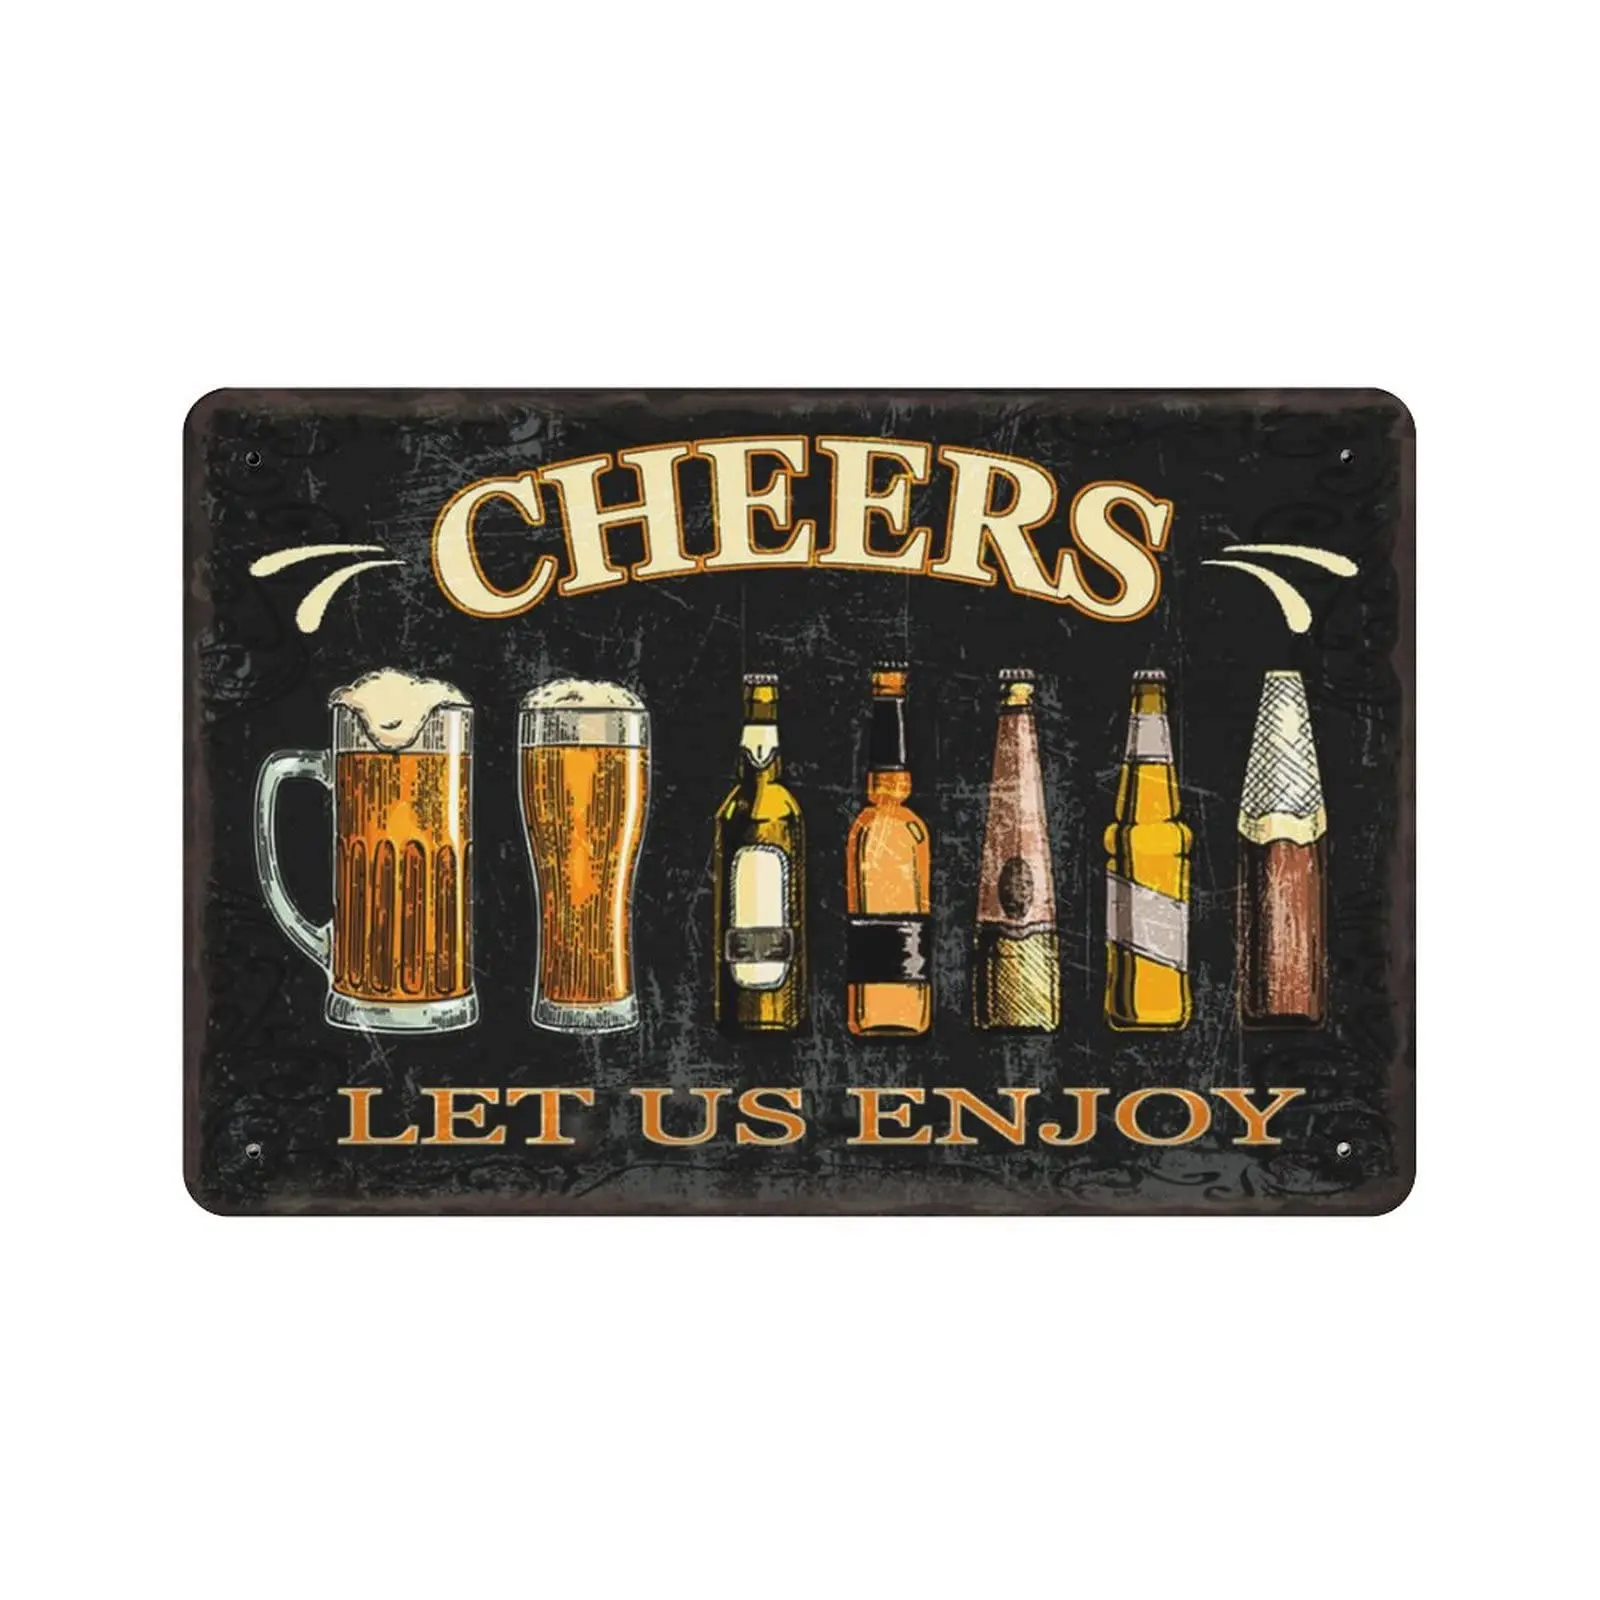 

Cheers Vintage Tin Bar Sign Farmhouse Home Wall Decor Metal Signs，Wall Decor for Bars Restaurants Cafes 8X12 Inch